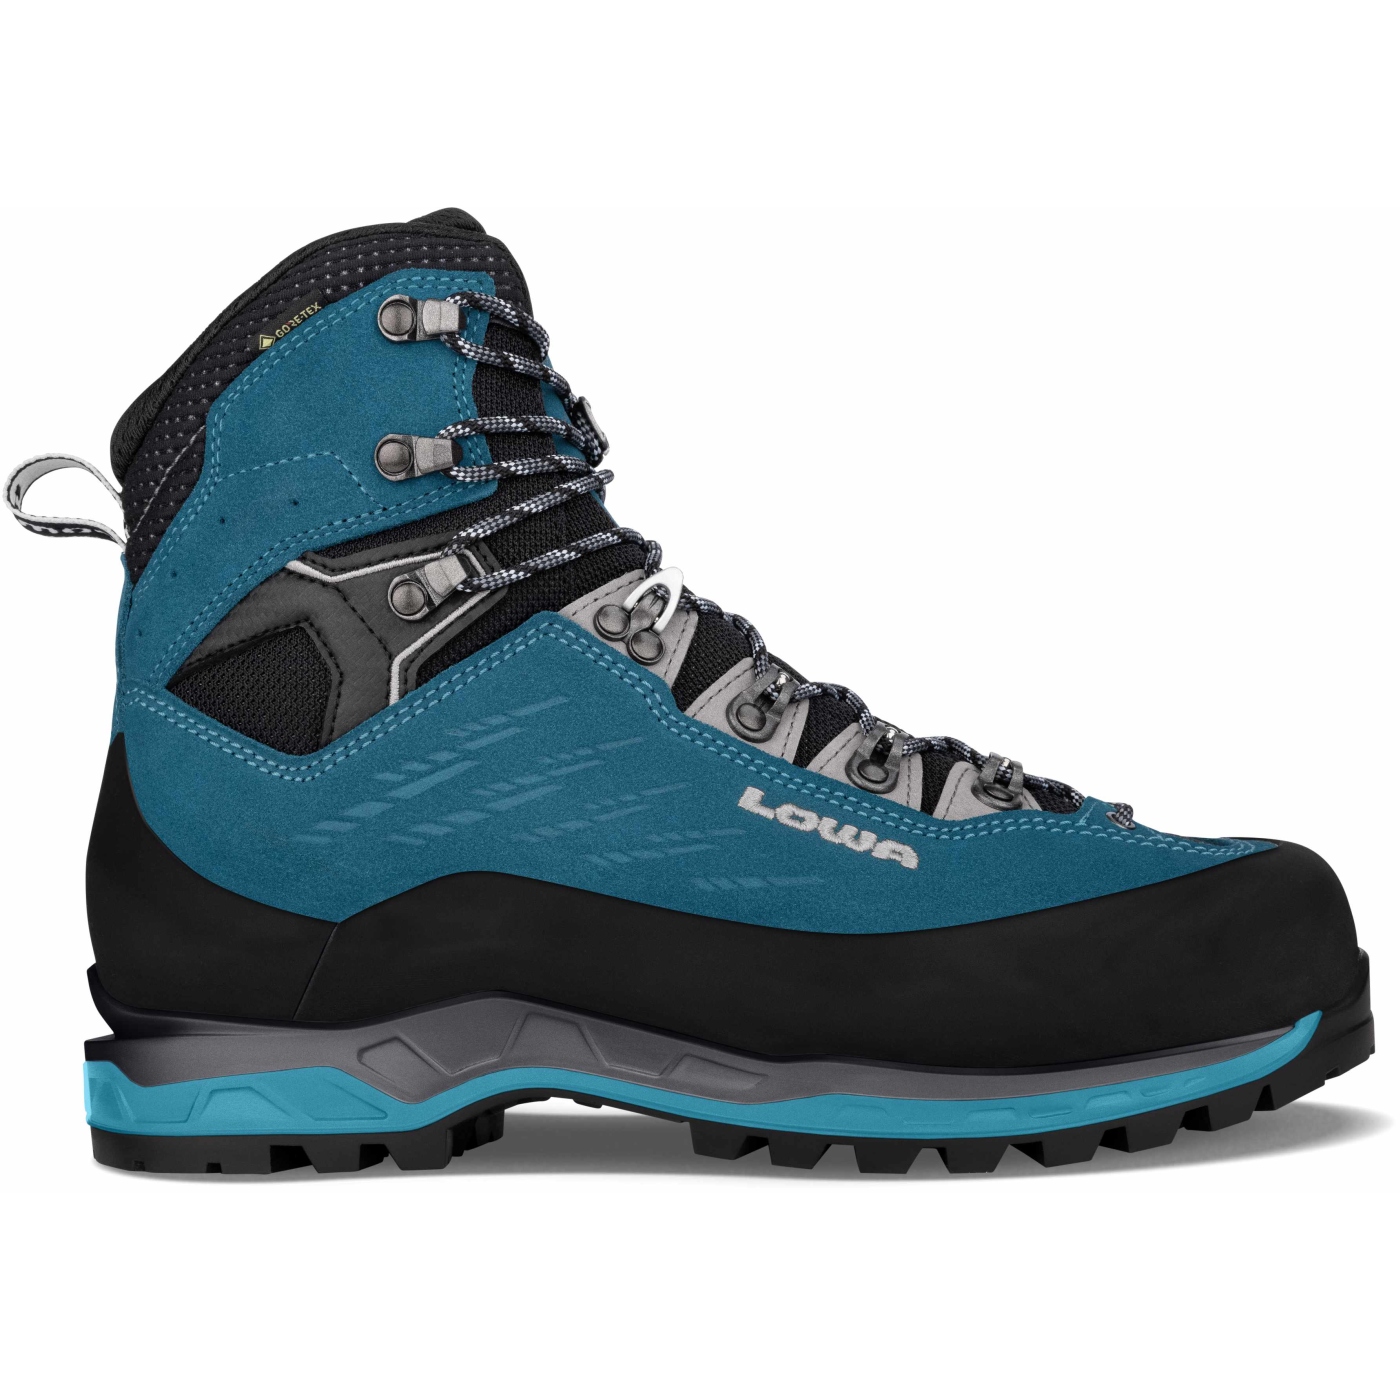 Image of LOWA Cevedale II GTX Women's Mountaineering Shoes - turquoise/grey